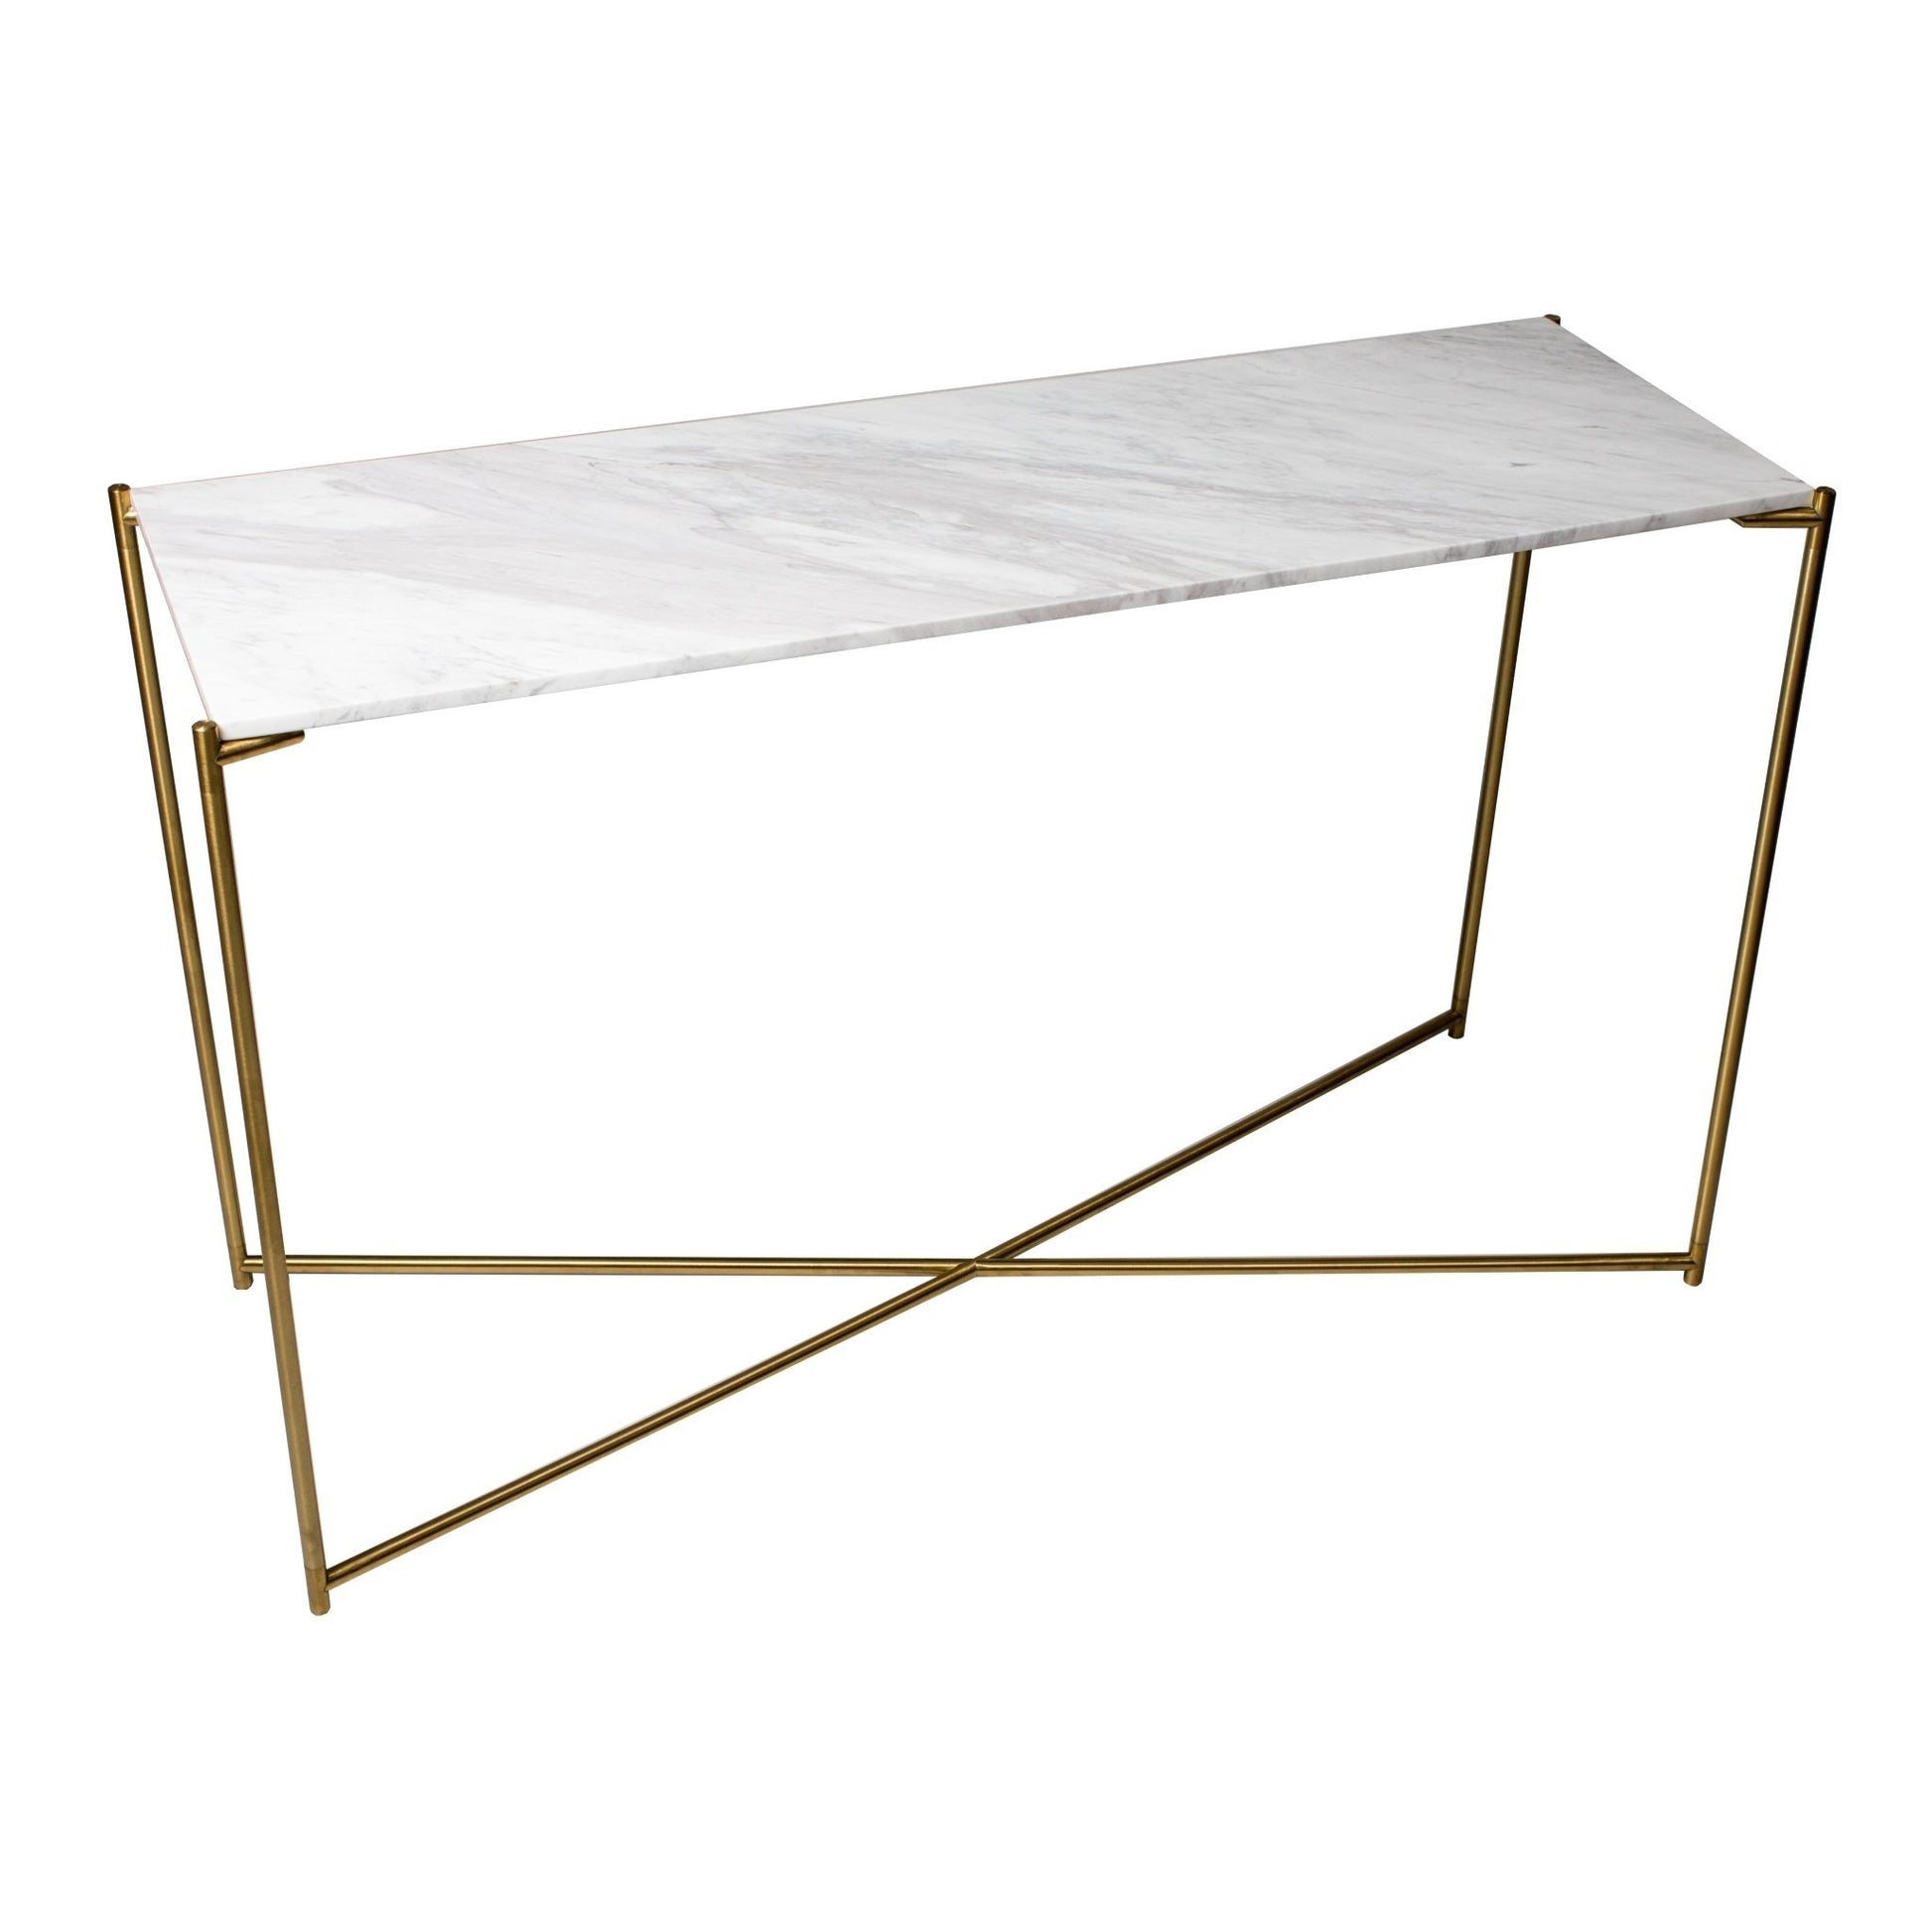 Iris Large Console Table - White Marble & Brass Frame